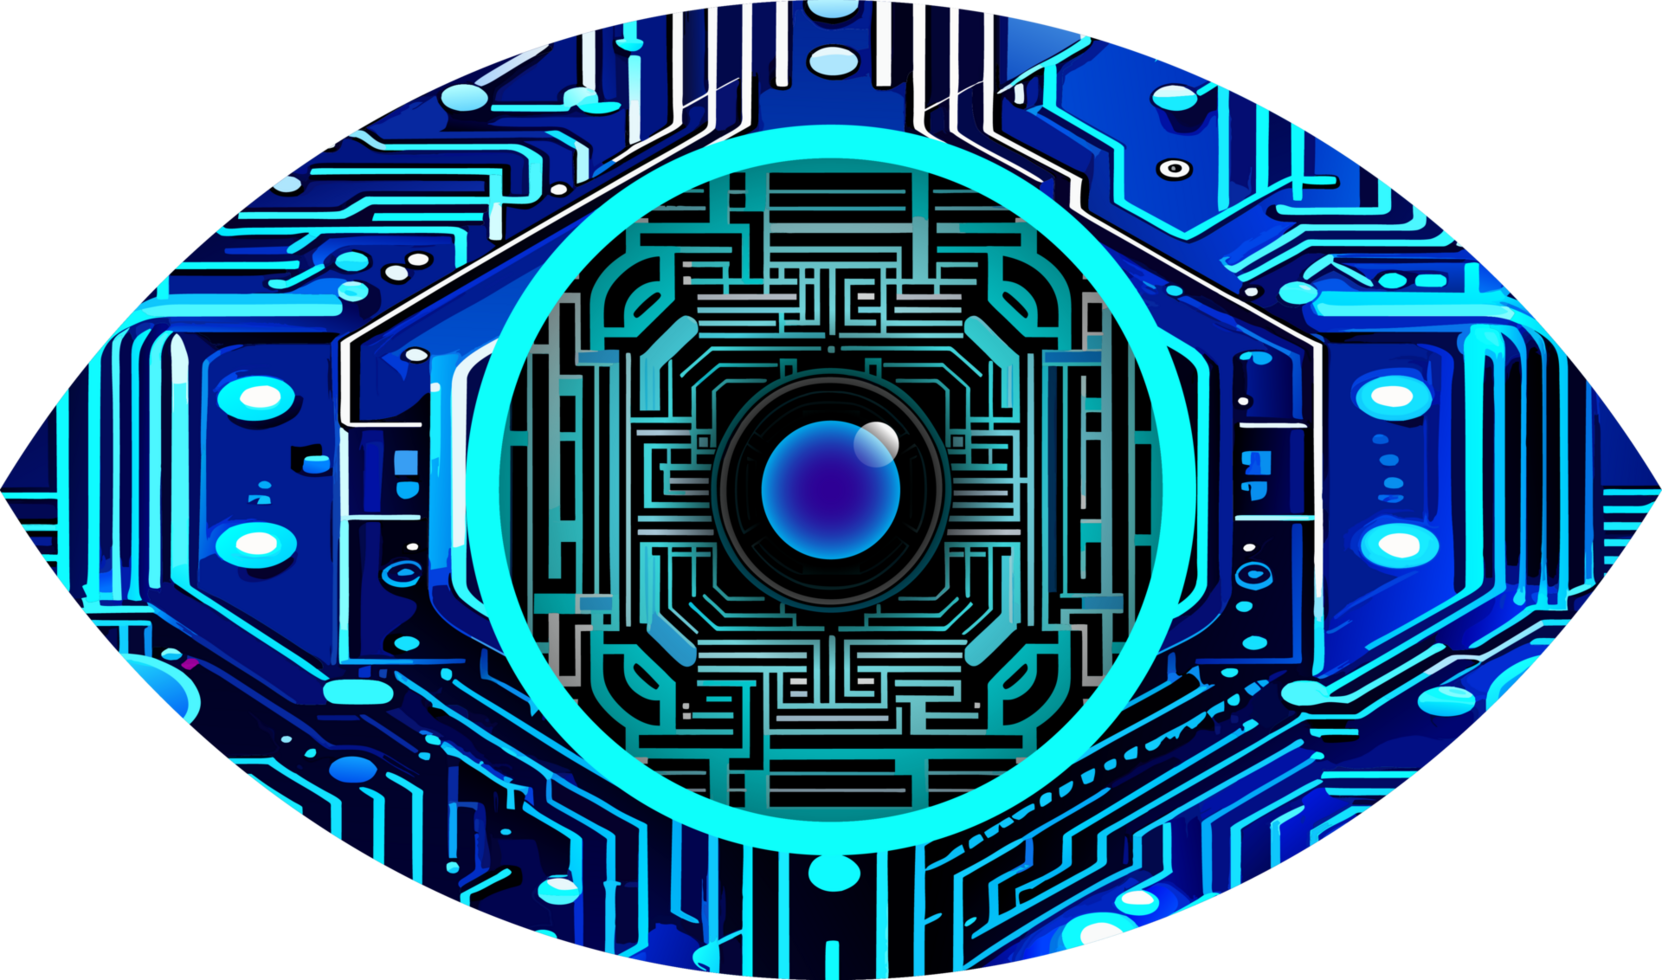 Blue eye cyber circuit future technology concept background png